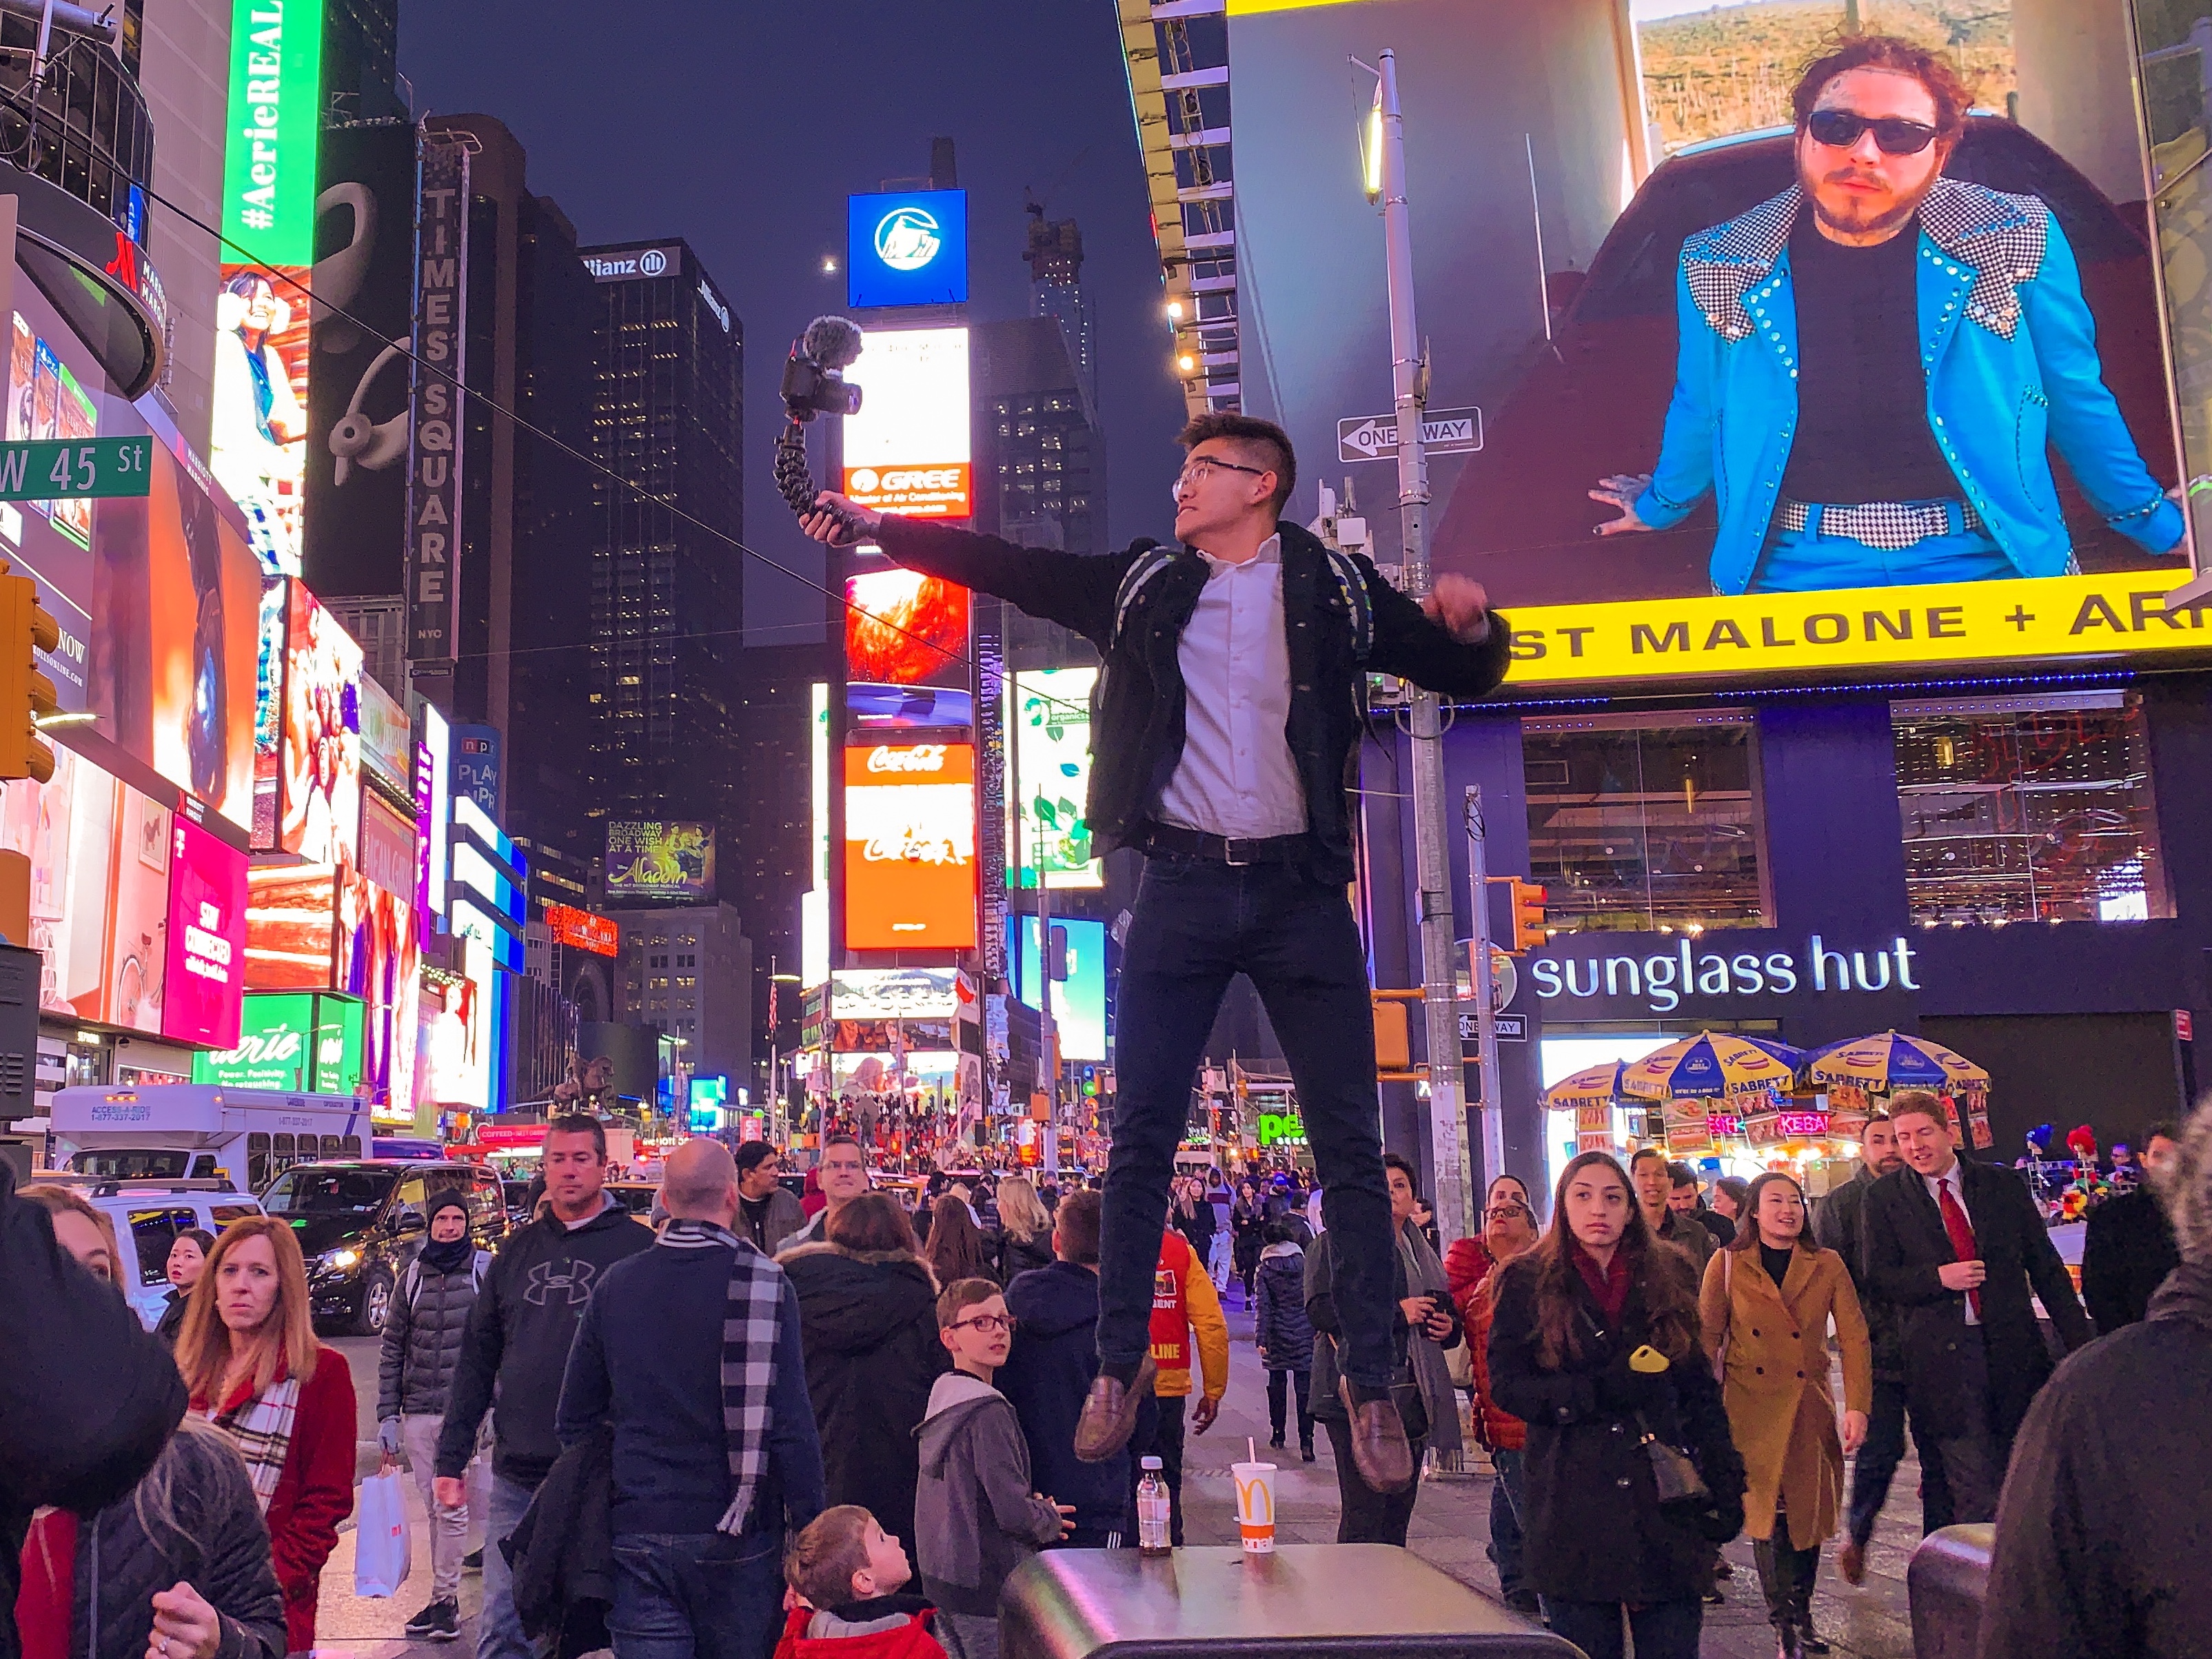 Young man holding a camera jumps above a trash can in the middle of busy Times Square